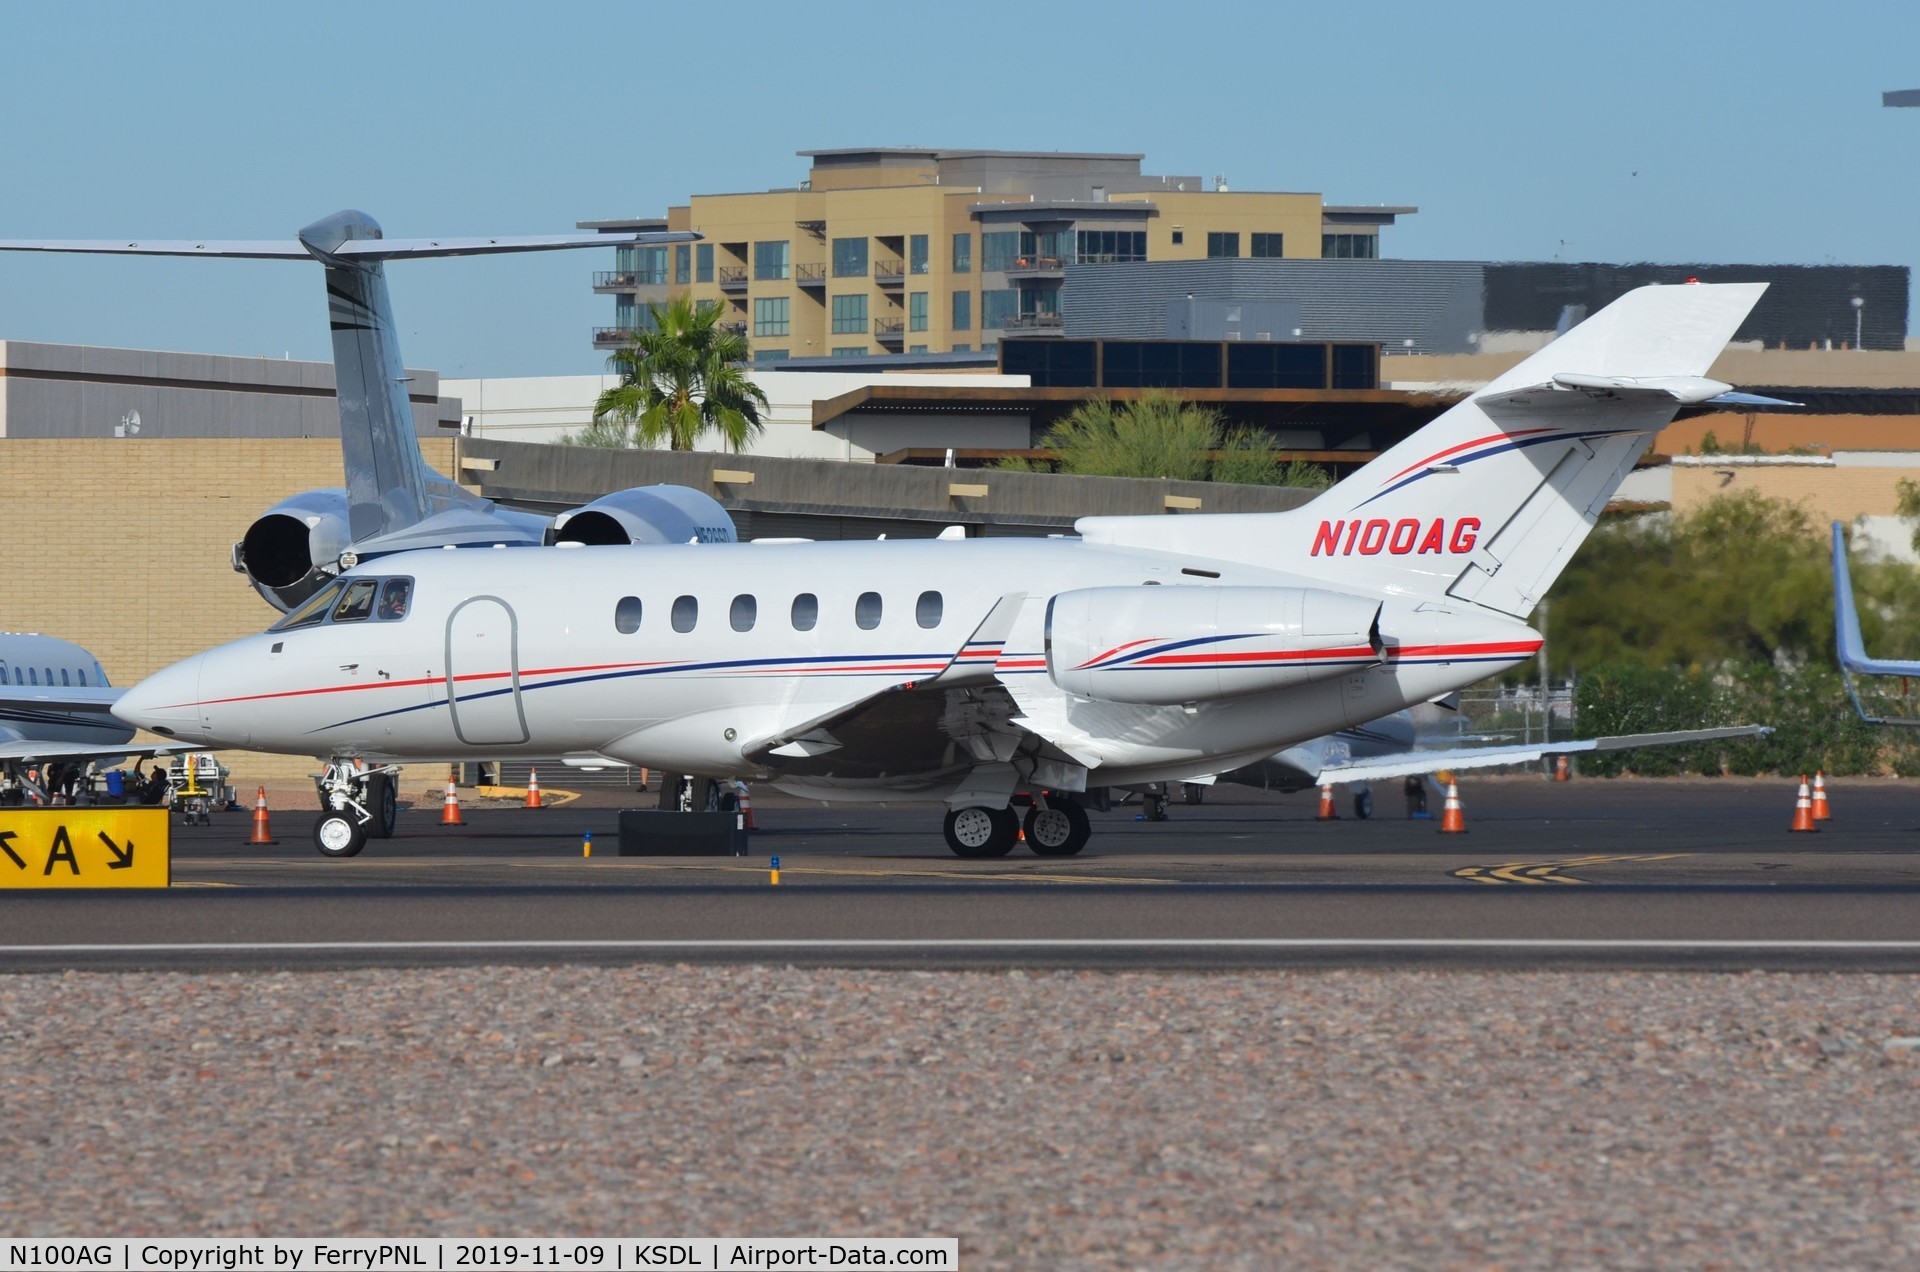 N100AG, 2005 Raytheon Hawker 800XP C/N 258747, HS800XP taxying for departure